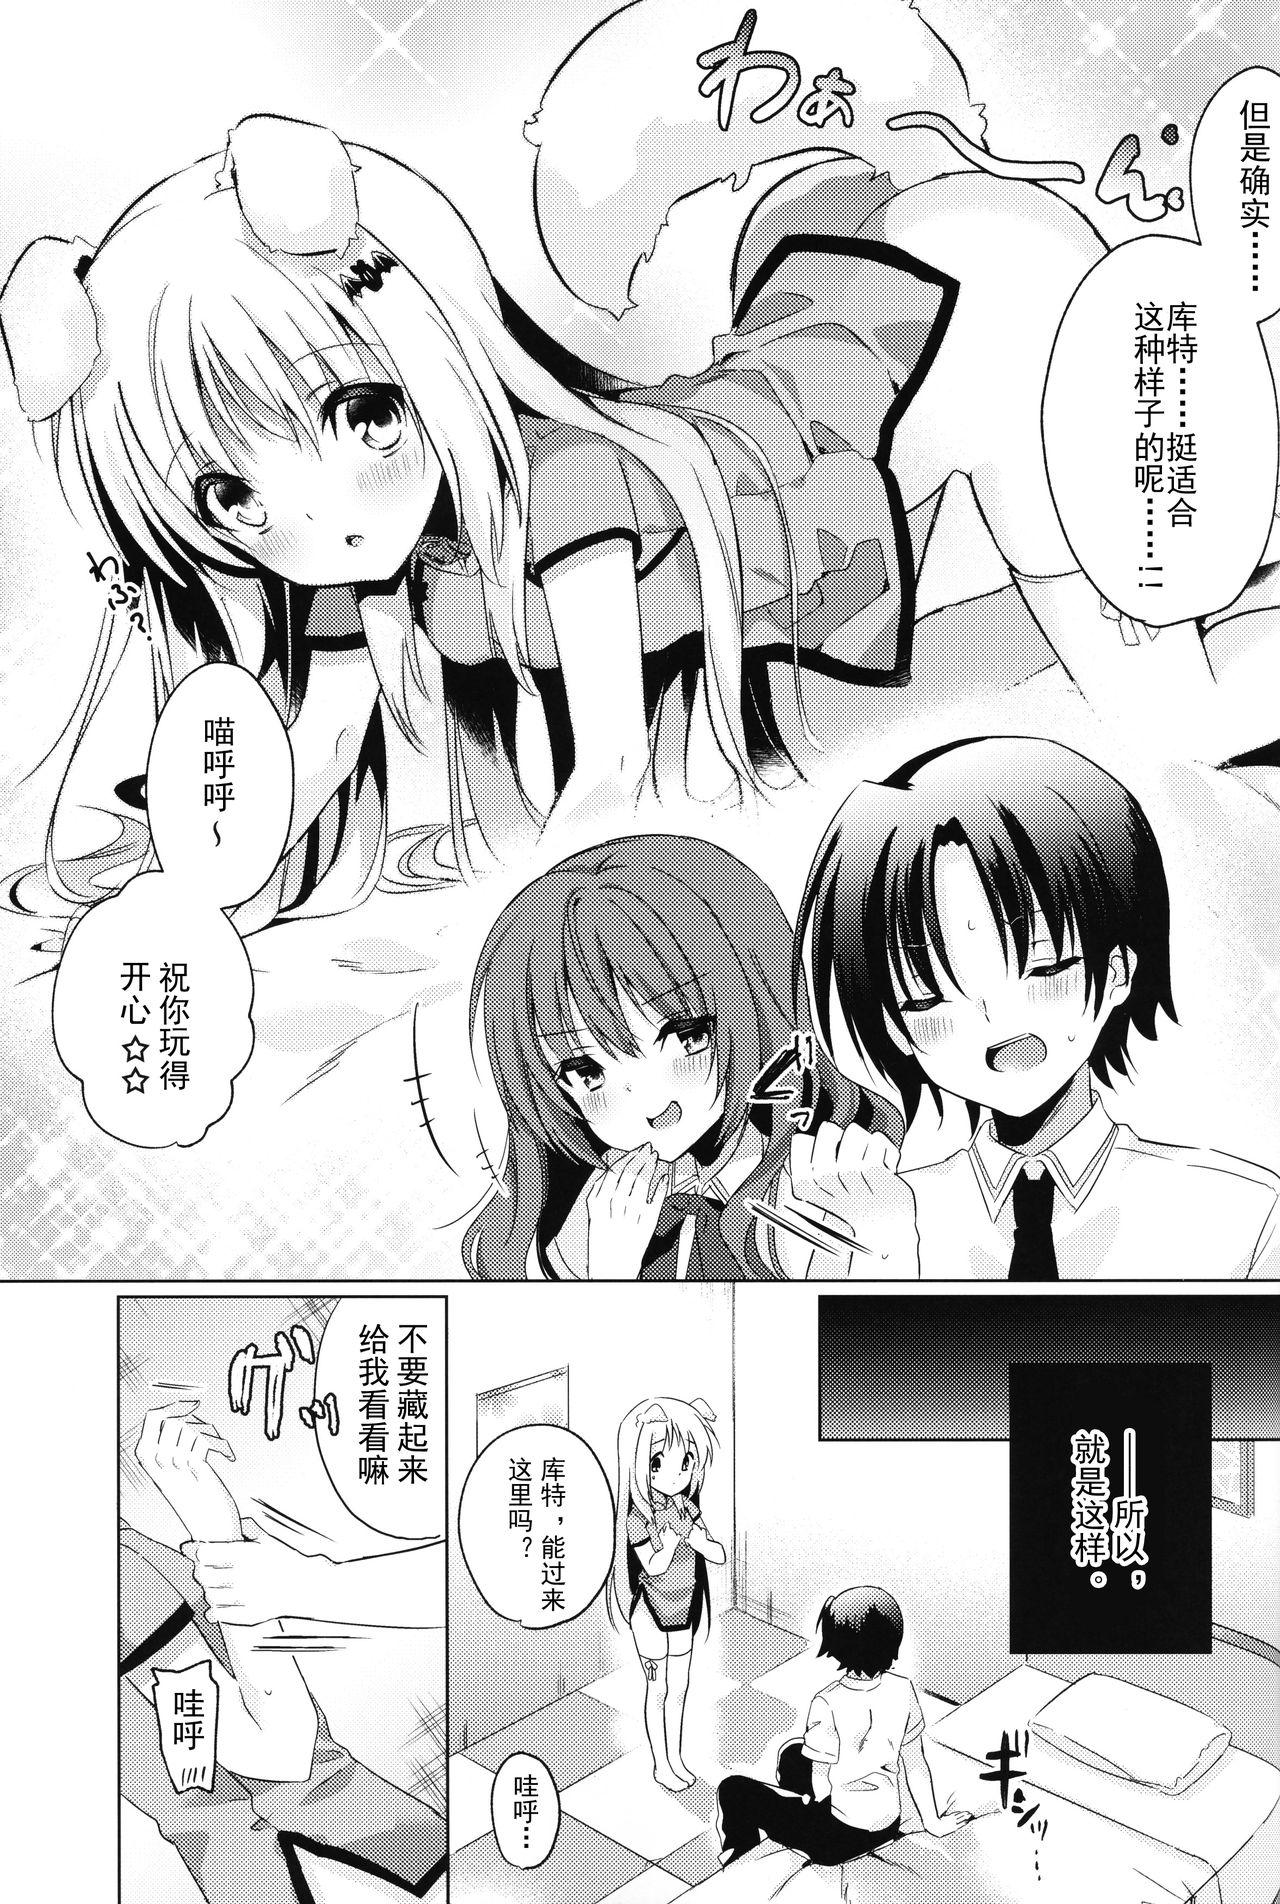 Harcore Kud After4 - Little busters Story - Page 7